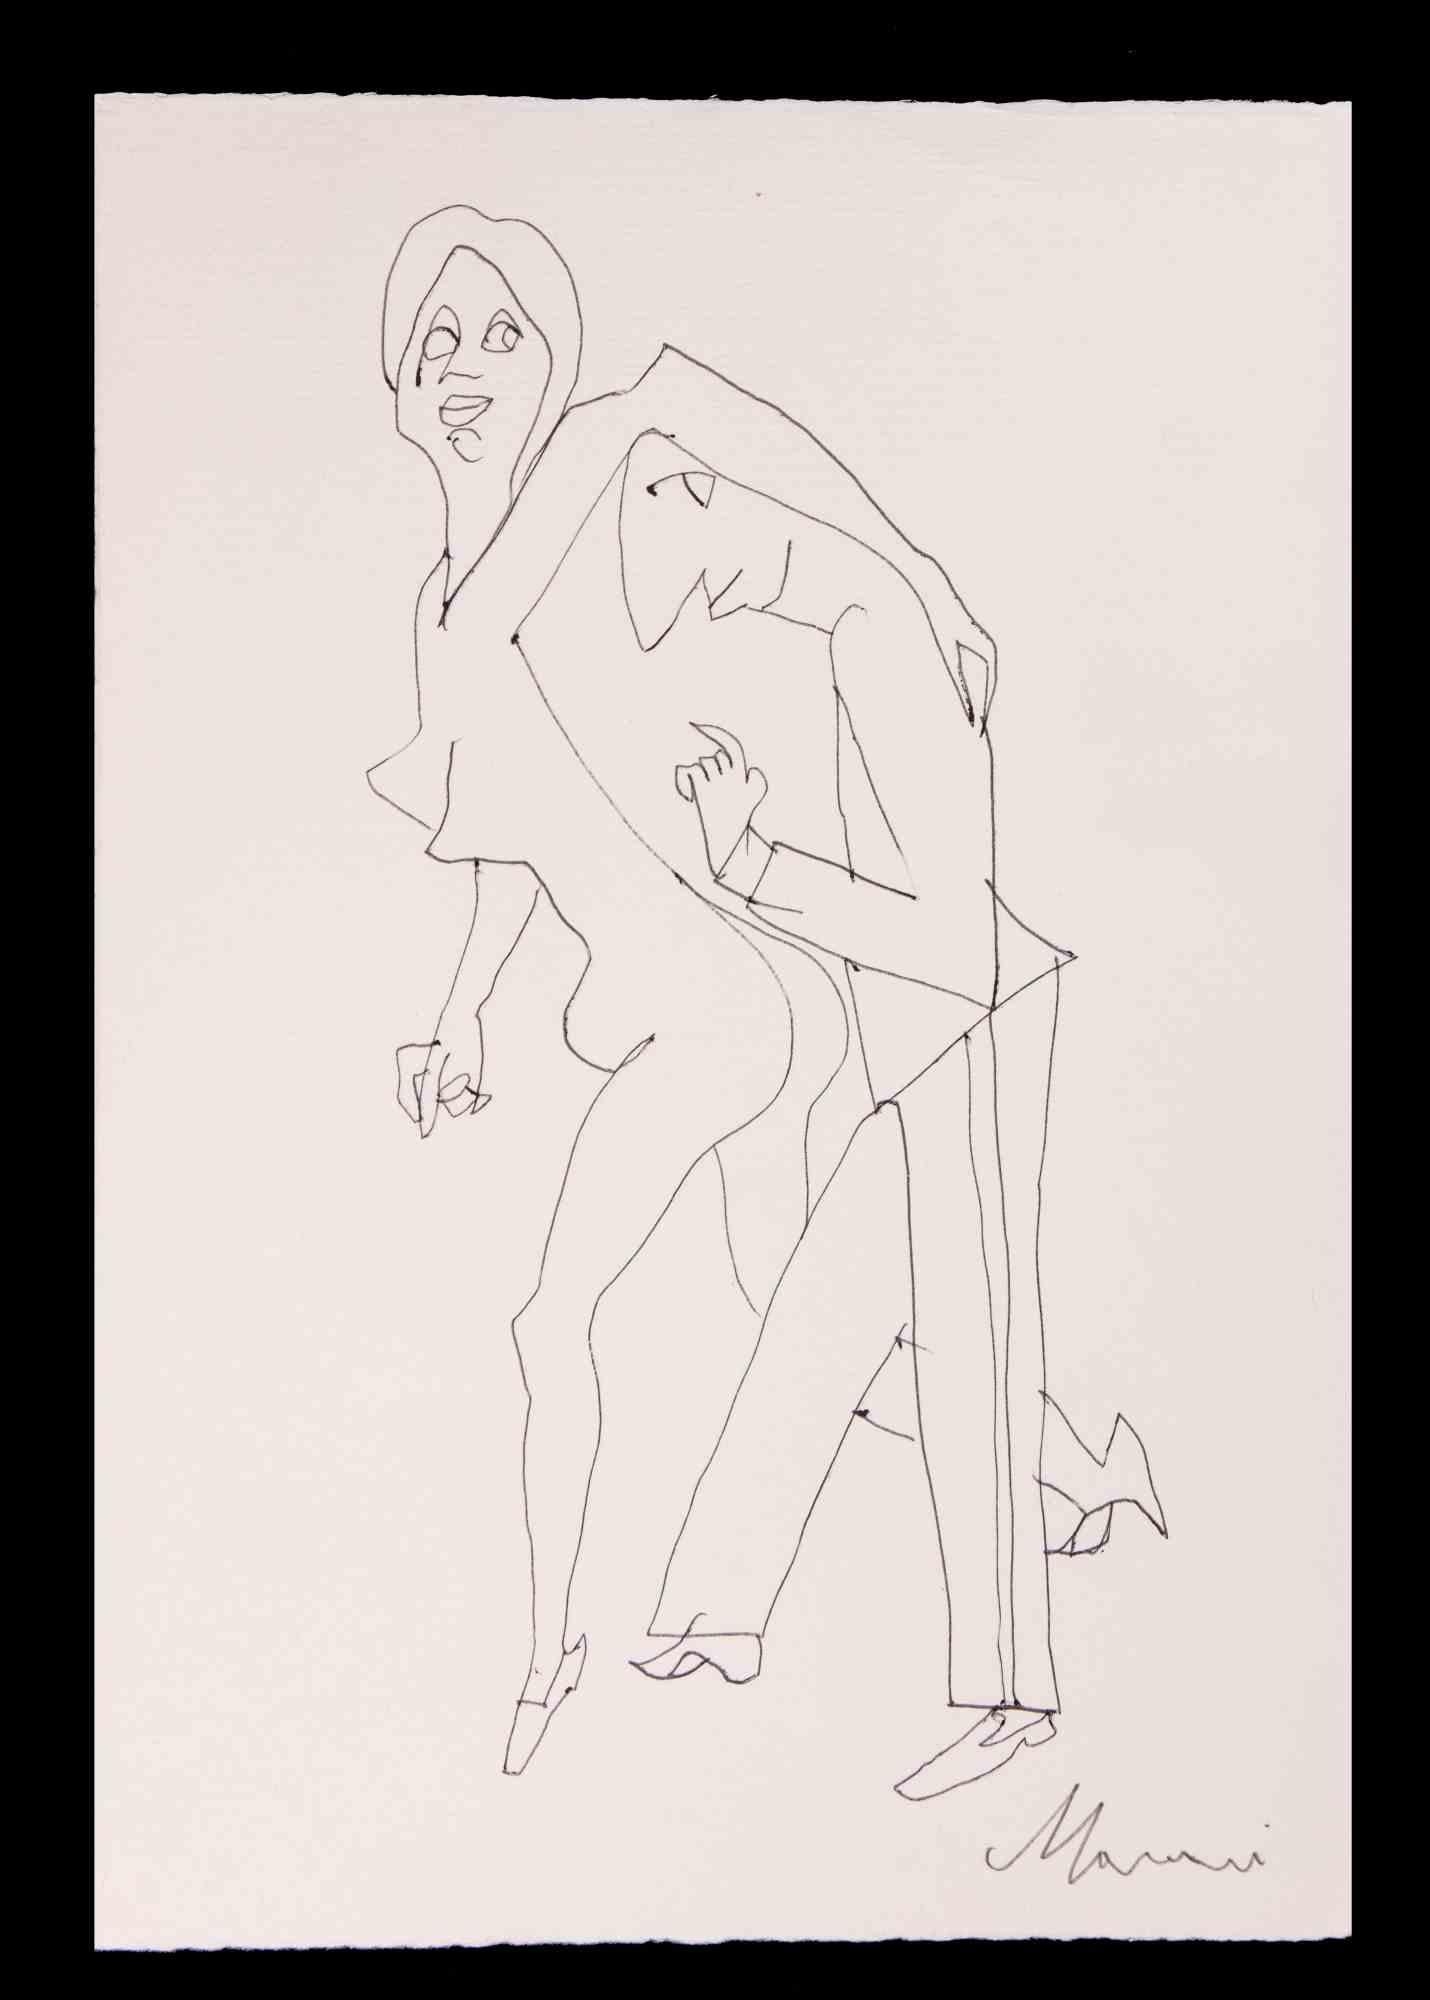 The Suitor is a China Ink Drawing realized by Mino Maccari (1924-1989) in 1965.

Hand signed on the lower margin.

Good condition on a yellowed paper.

Mino Maccari (Siena, 1924-Rome, June 16, 1989) was an Italian writer, painter, engraver and